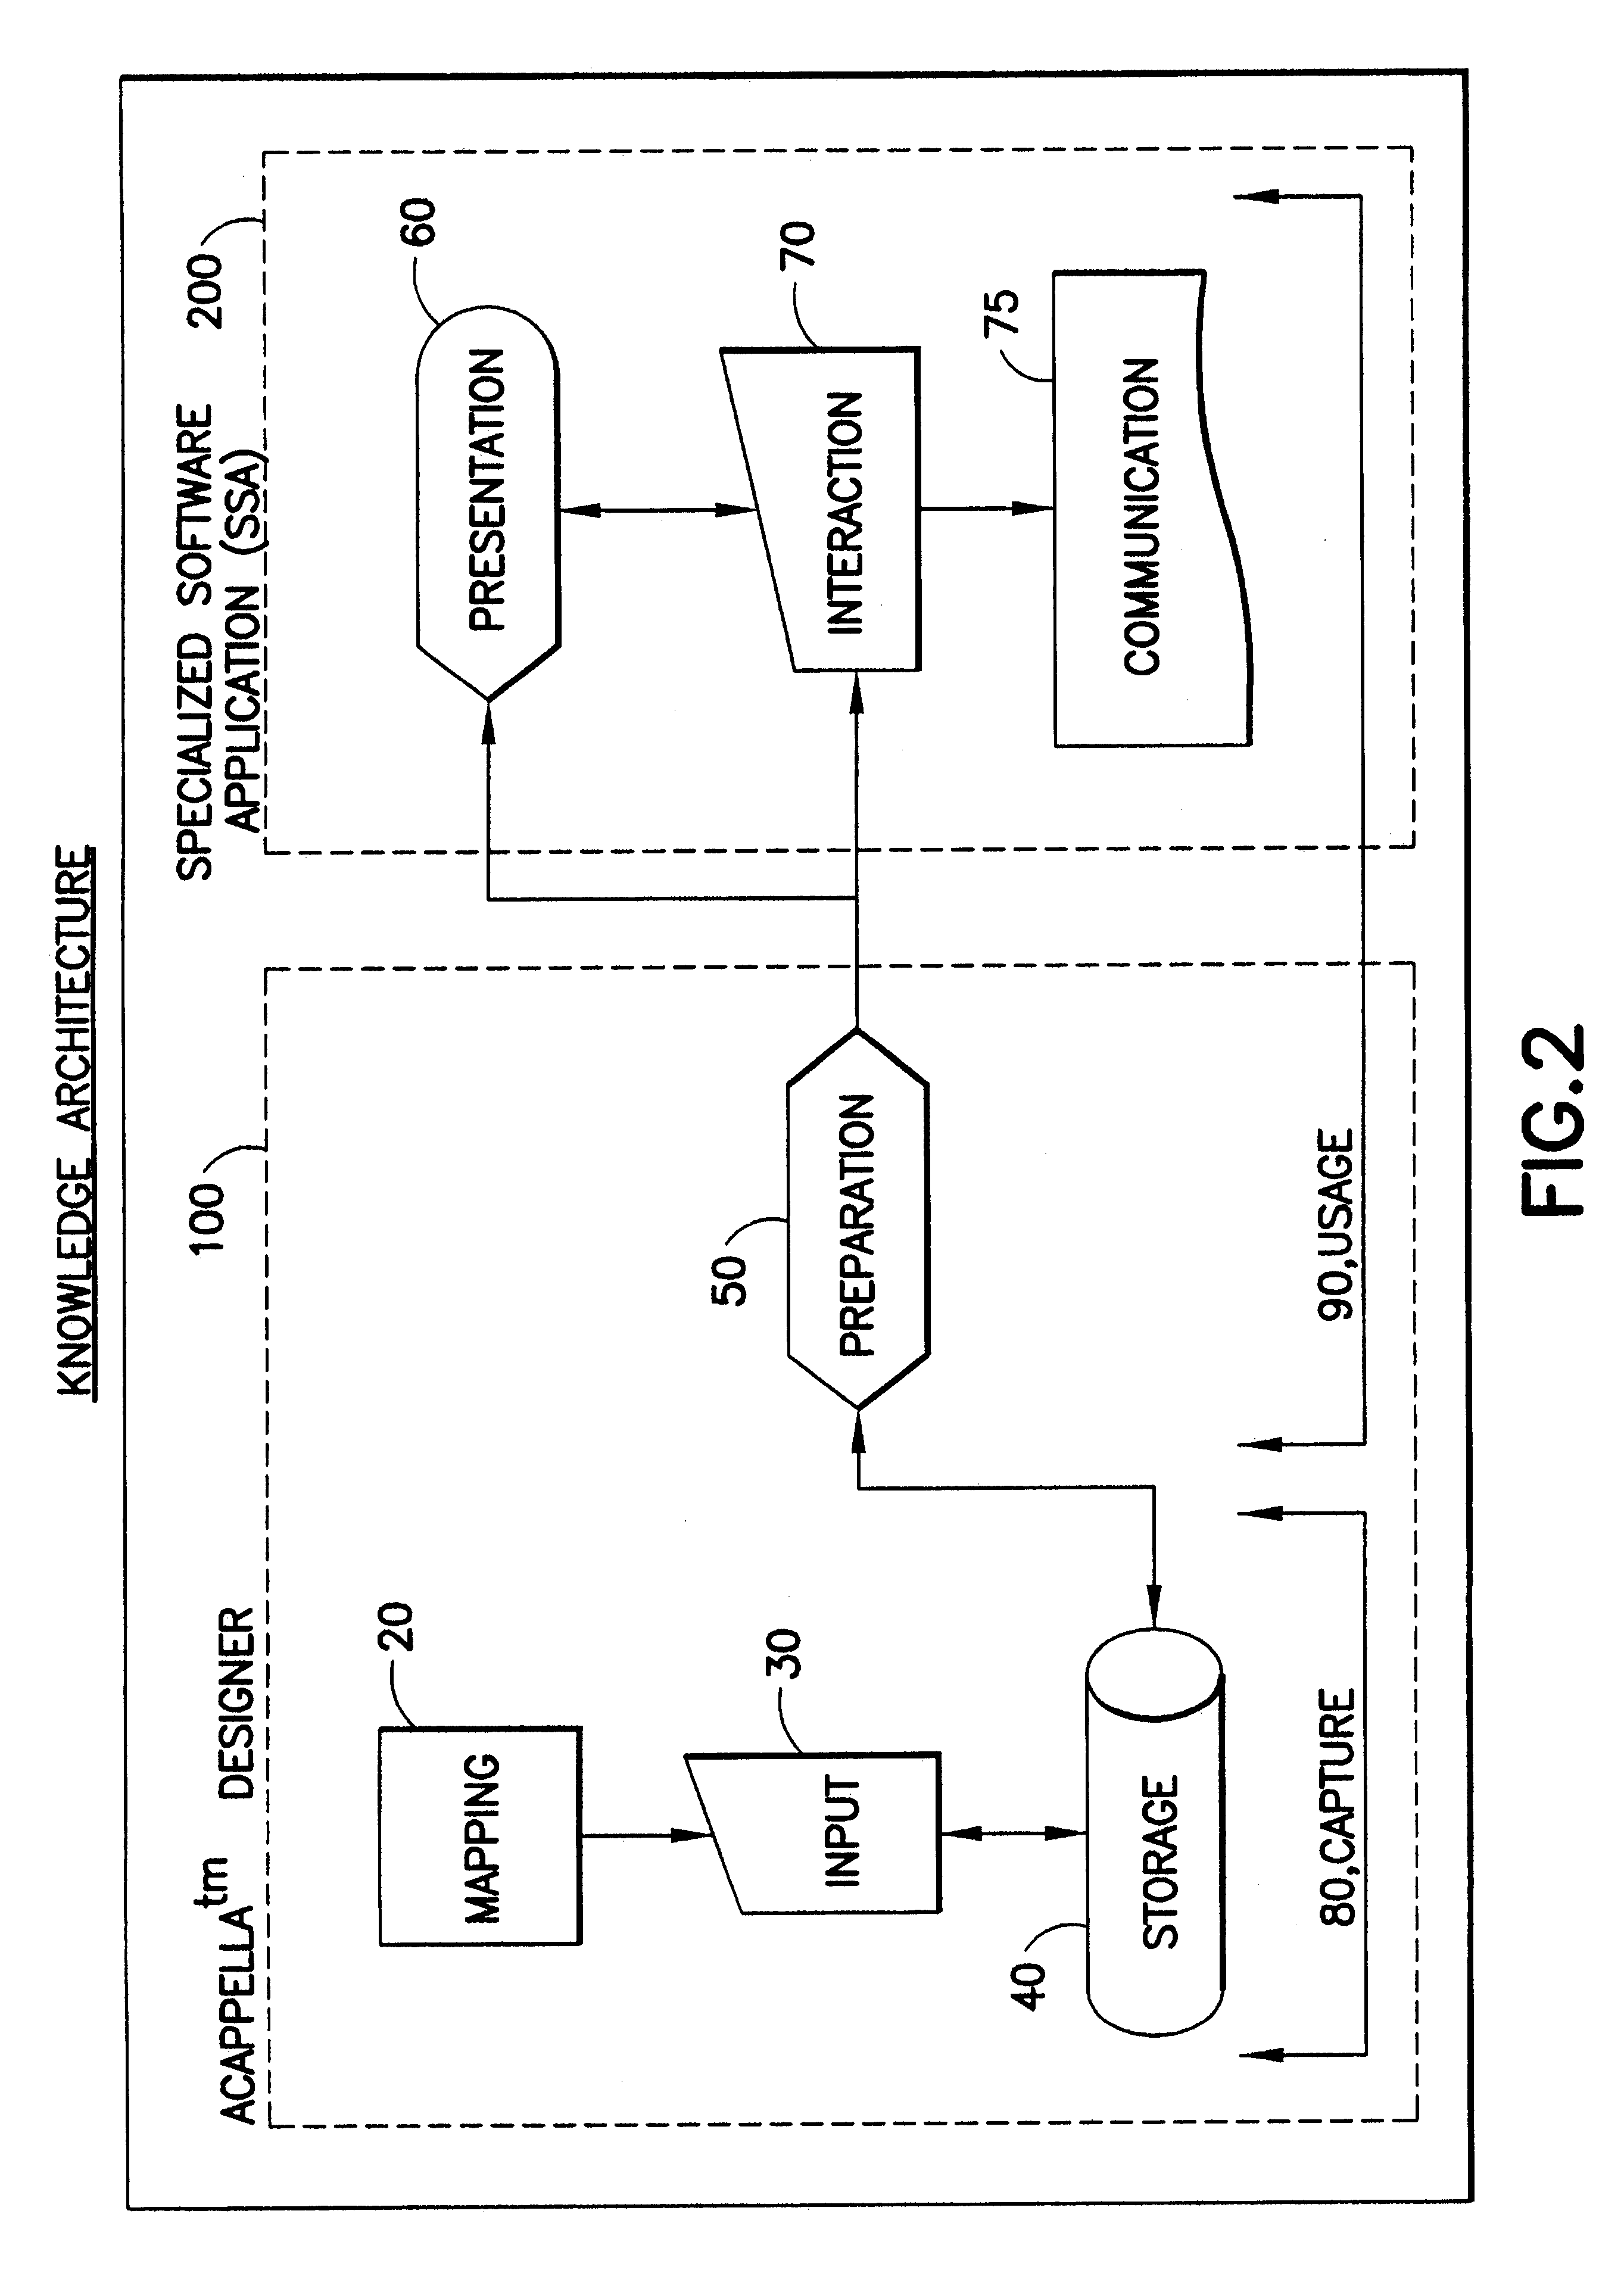 System and method of knowledge architecture